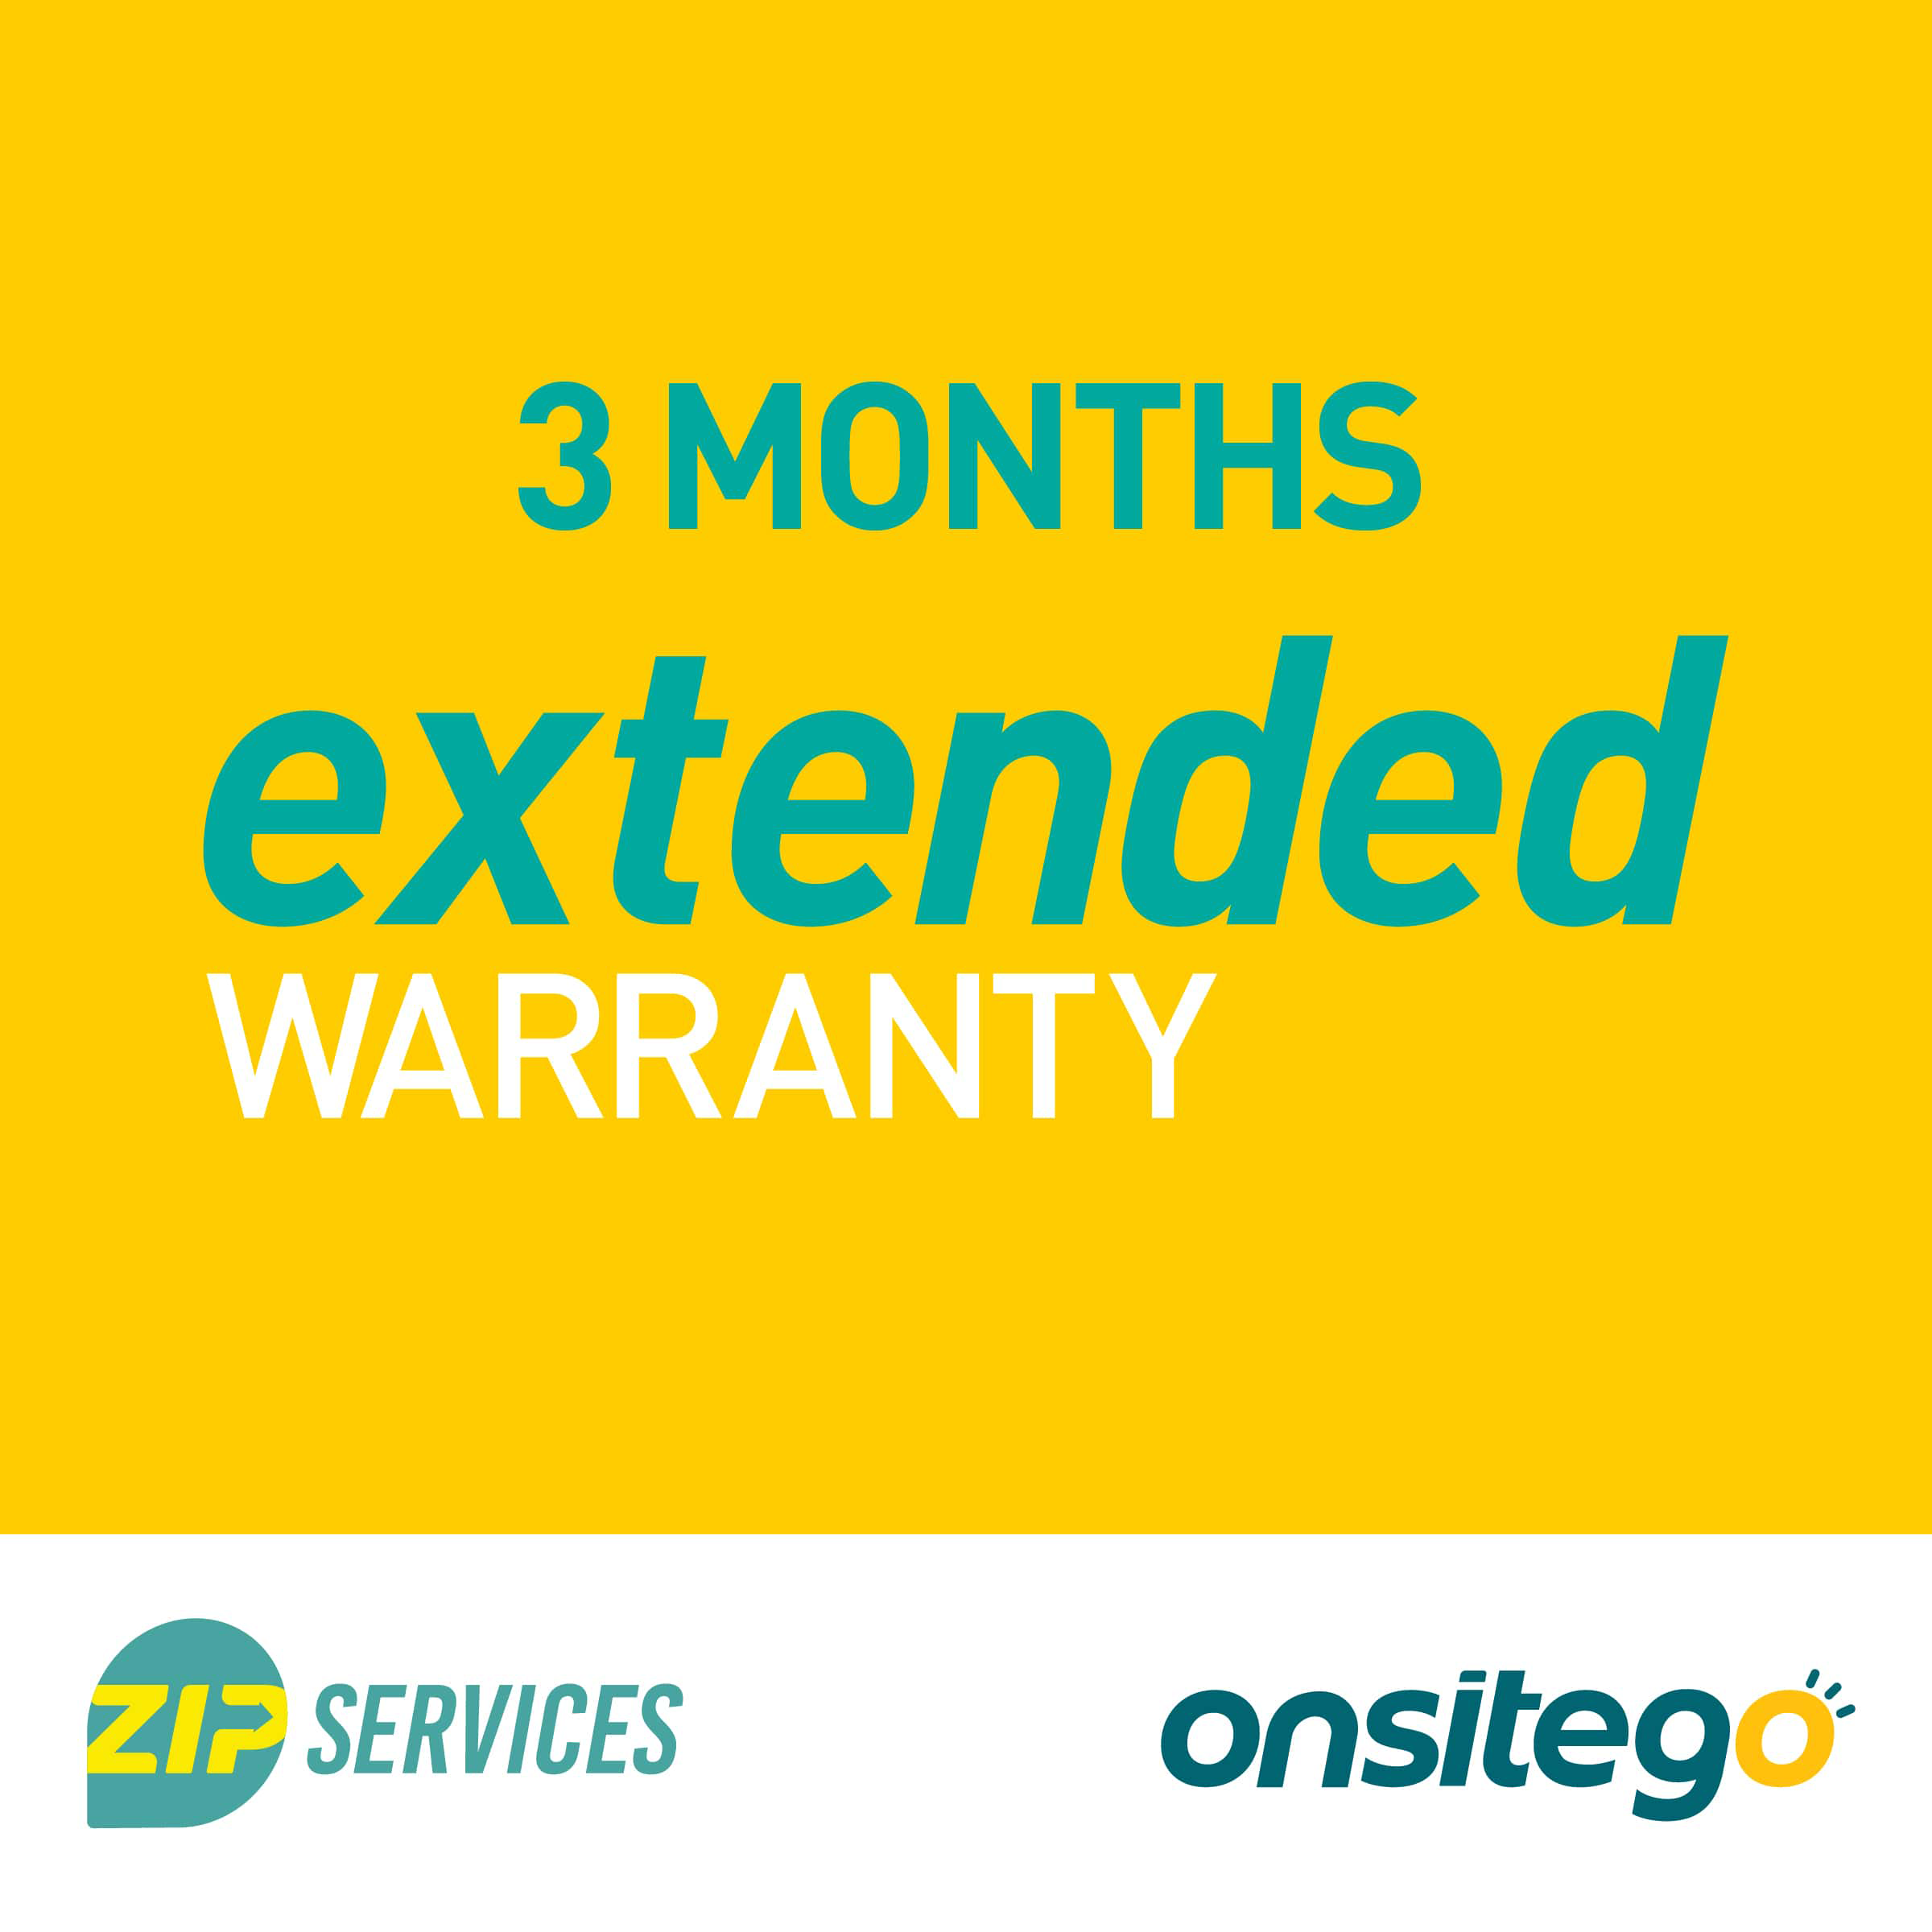 OnsiteGo 3 Months Extended Warranty for PC Accessory  Rs.2001 - Rs.3000_1